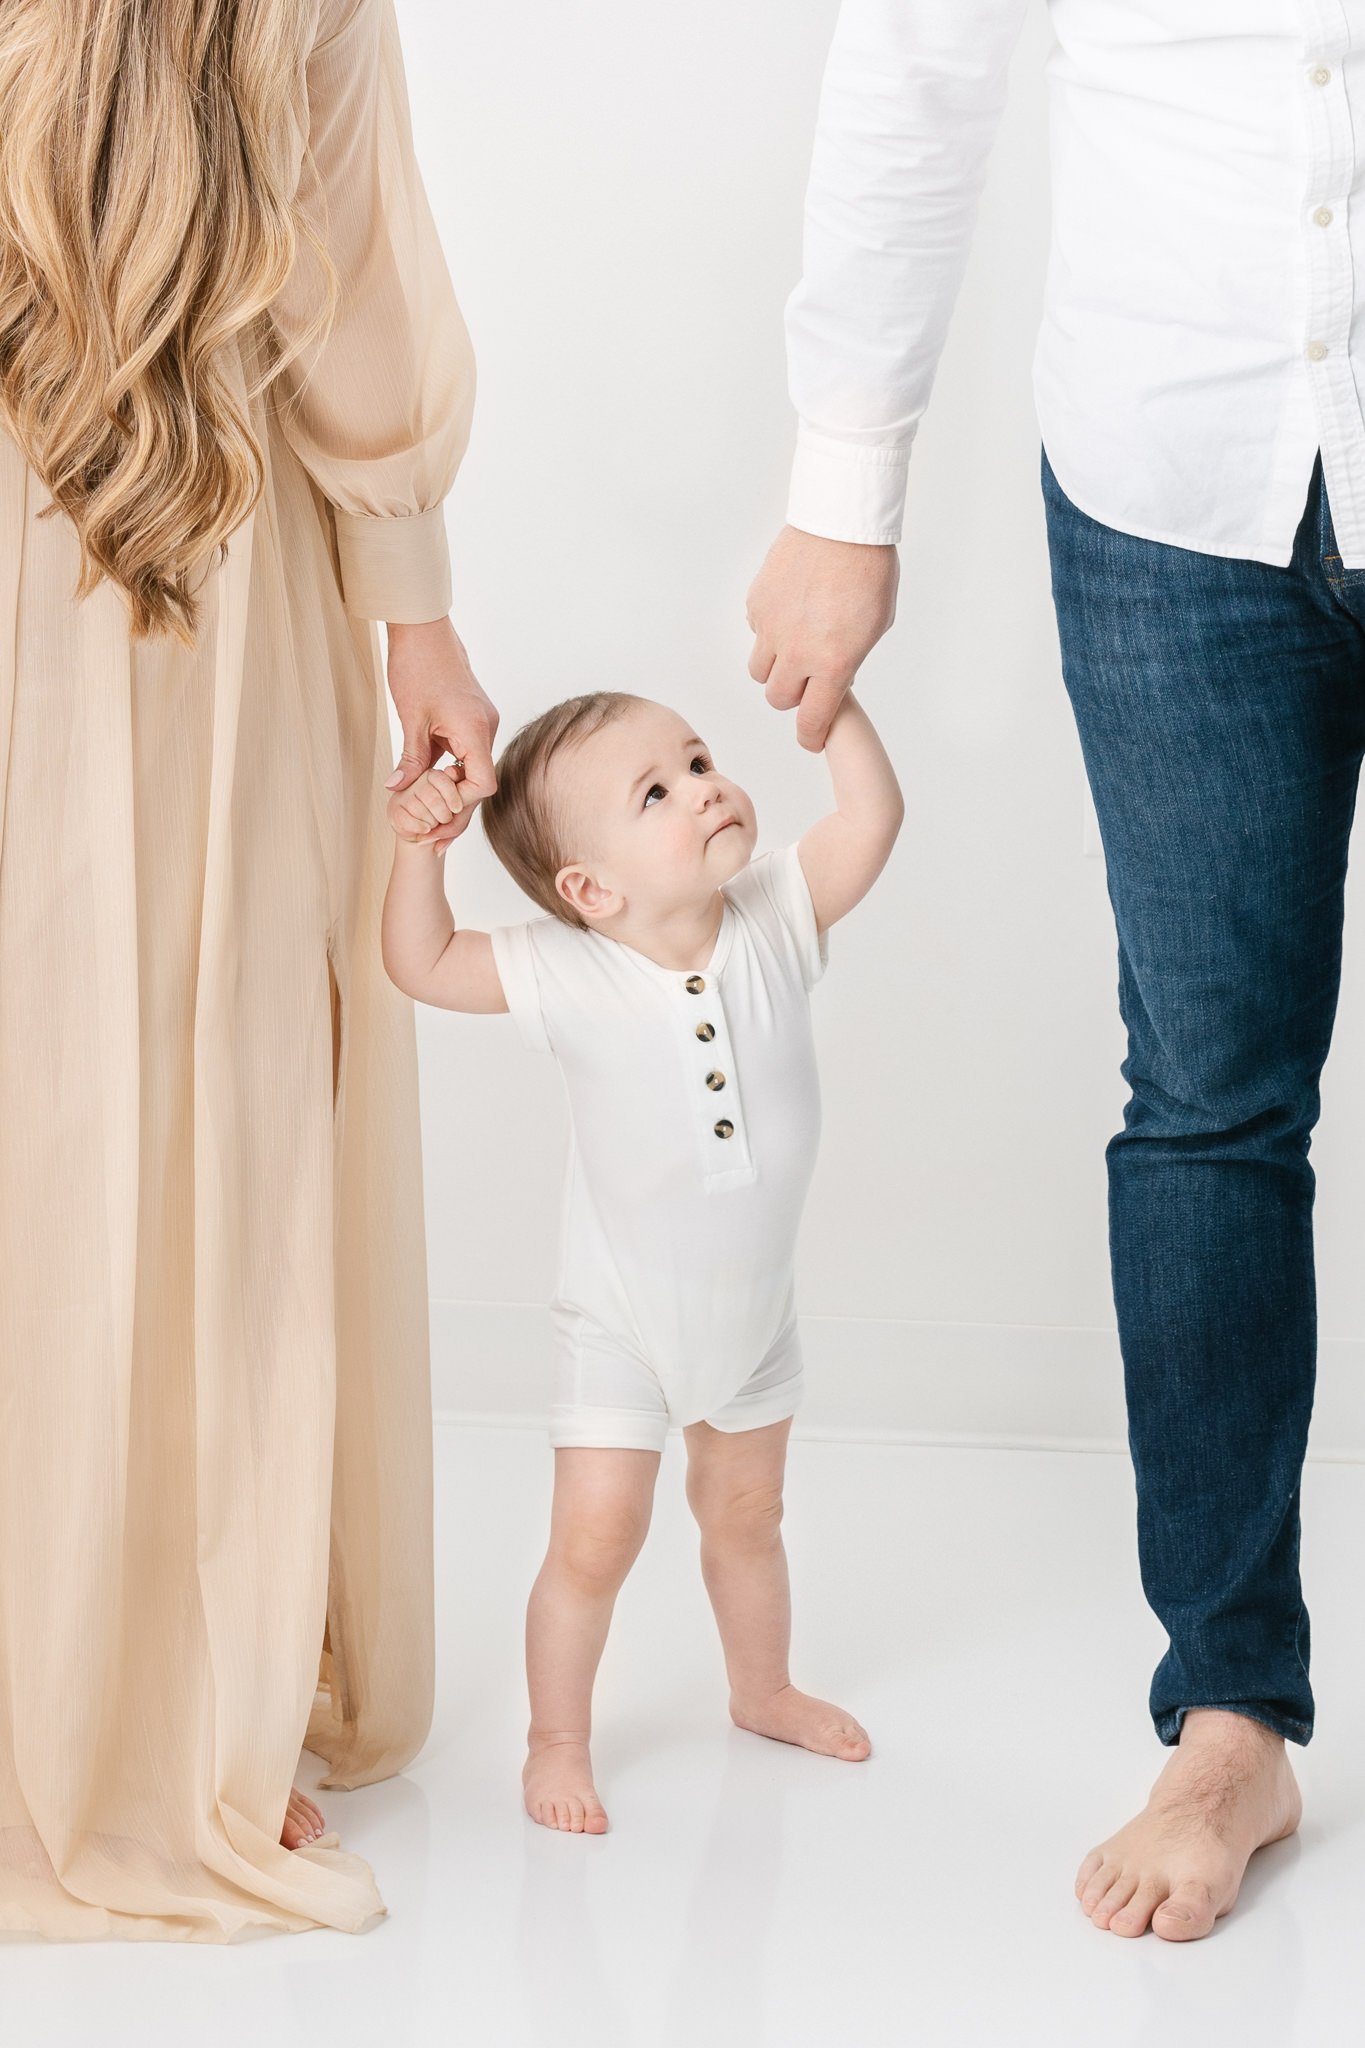  Toddler baby holds his parent's hands and looks up at them captured by Nicole Hawkins Photography in New Jersey. toddler poses with parents romper for boy #NicoleHawkinsPhotography #NicoleHawkinsBabies #FirstBirthdayPhotography #StudioFamilyPortrait